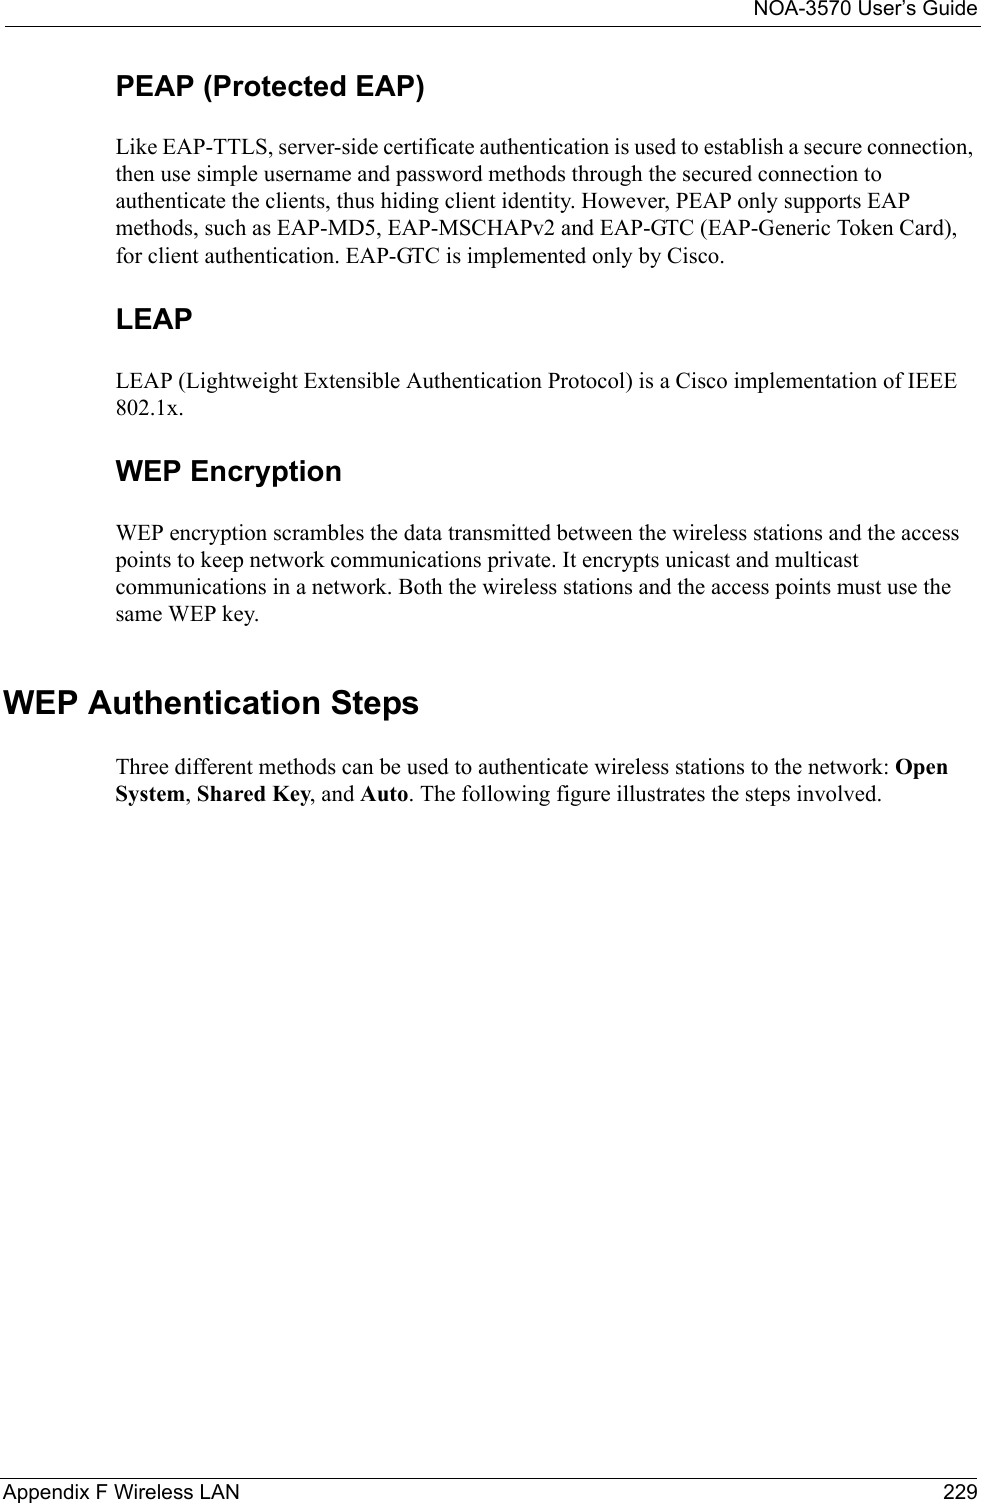 NOA-3570 User’s GuideAppendix F Wireless LAN 229PEAP (Protected EAP)   Like EAP-TTLS, server-side certificate authentication is used to establish a secure connection, then use simple username and password methods through the secured connection to authenticate the clients, thus hiding client identity. However, PEAP only supports EAP methods, such as EAP-MD5, EAP-MSCHAPv2 and EAP-GTC (EAP-Generic Token Card), for client authentication. EAP-GTC is implemented only by Cisco.LEAPLEAP (Lightweight Extensible Authentication Protocol) is a Cisco implementation of IEEE 802.1x. WEP EncryptionWEP encryption scrambles the data transmitted between the wireless stations and the access points to keep network communications private. It encrypts unicast and multicast communications in a network. Both the wireless stations and the access points must use the same WEP key. WEP Authentication StepsThree different methods can be used to authenticate wireless stations to the network: Open System, Shared Key, and Auto. The following figure illustrates the steps involved.